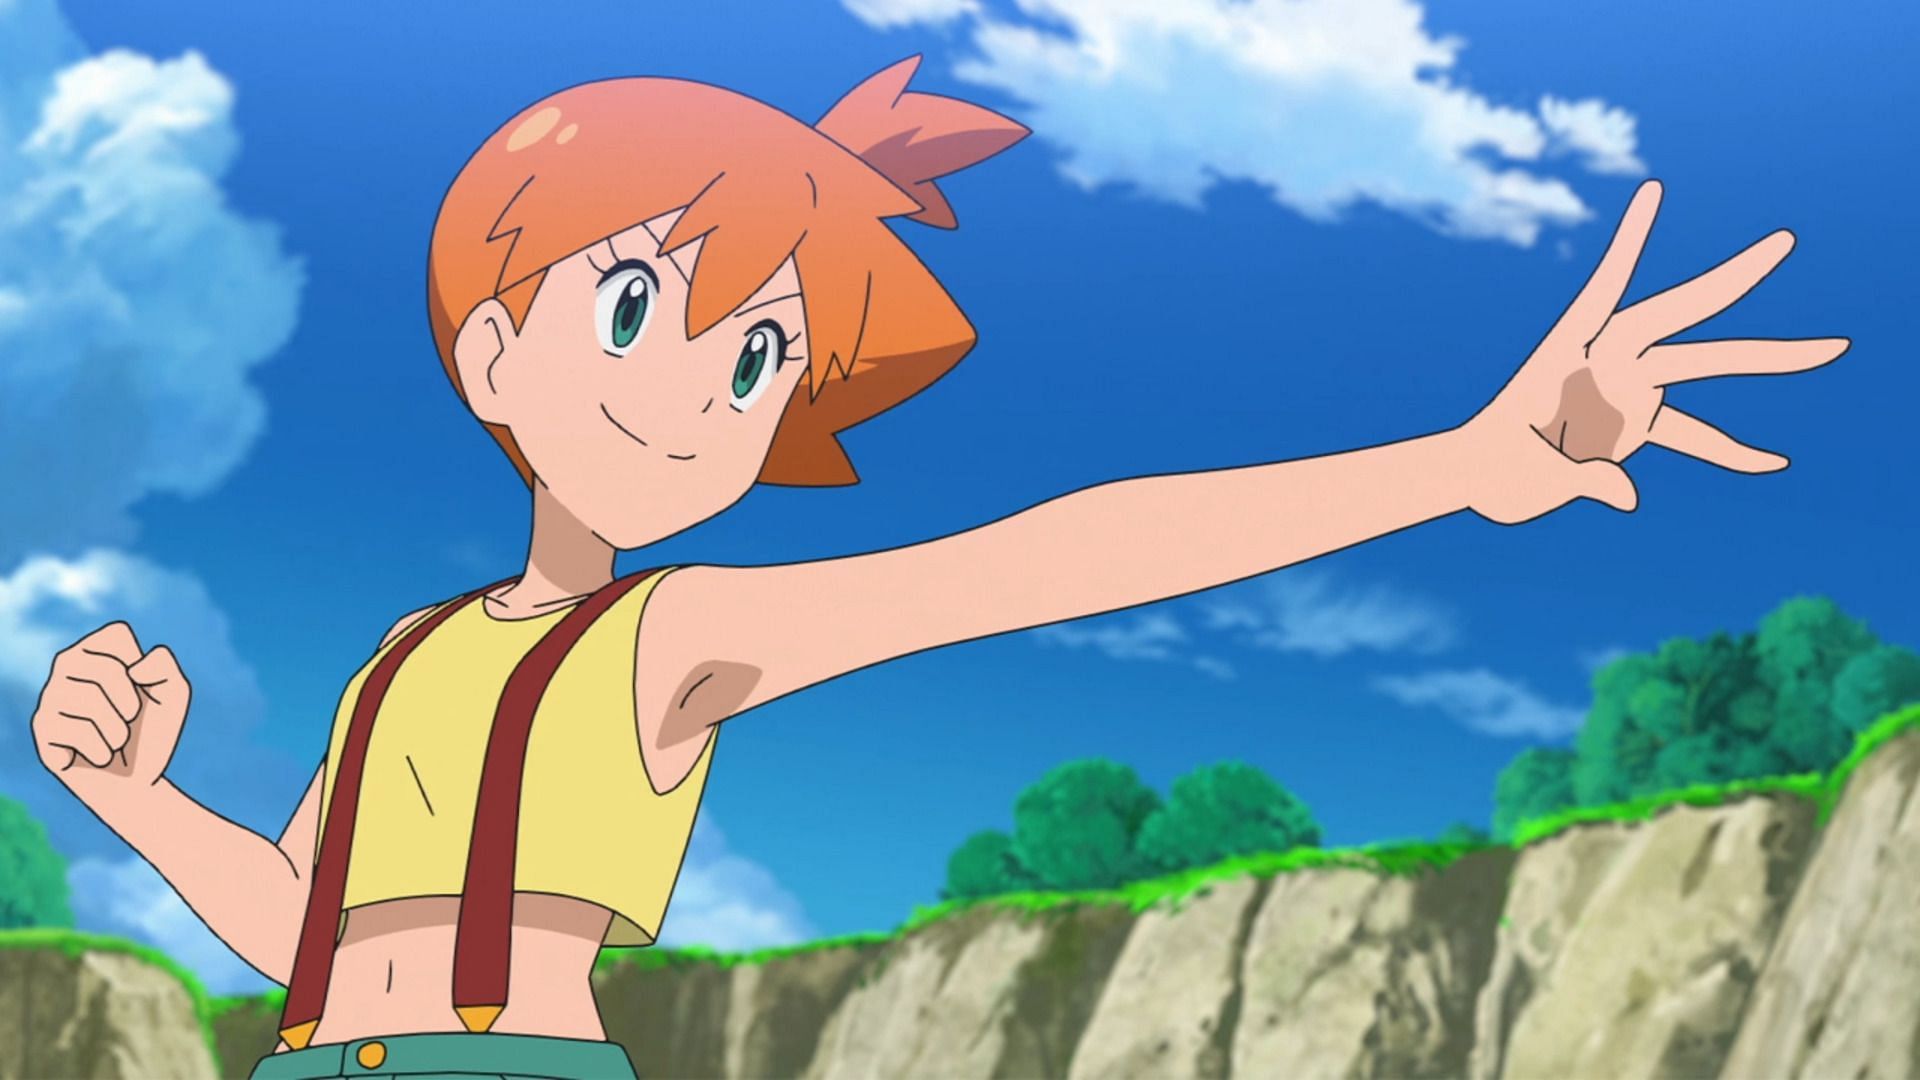 Misty as seen in the anime